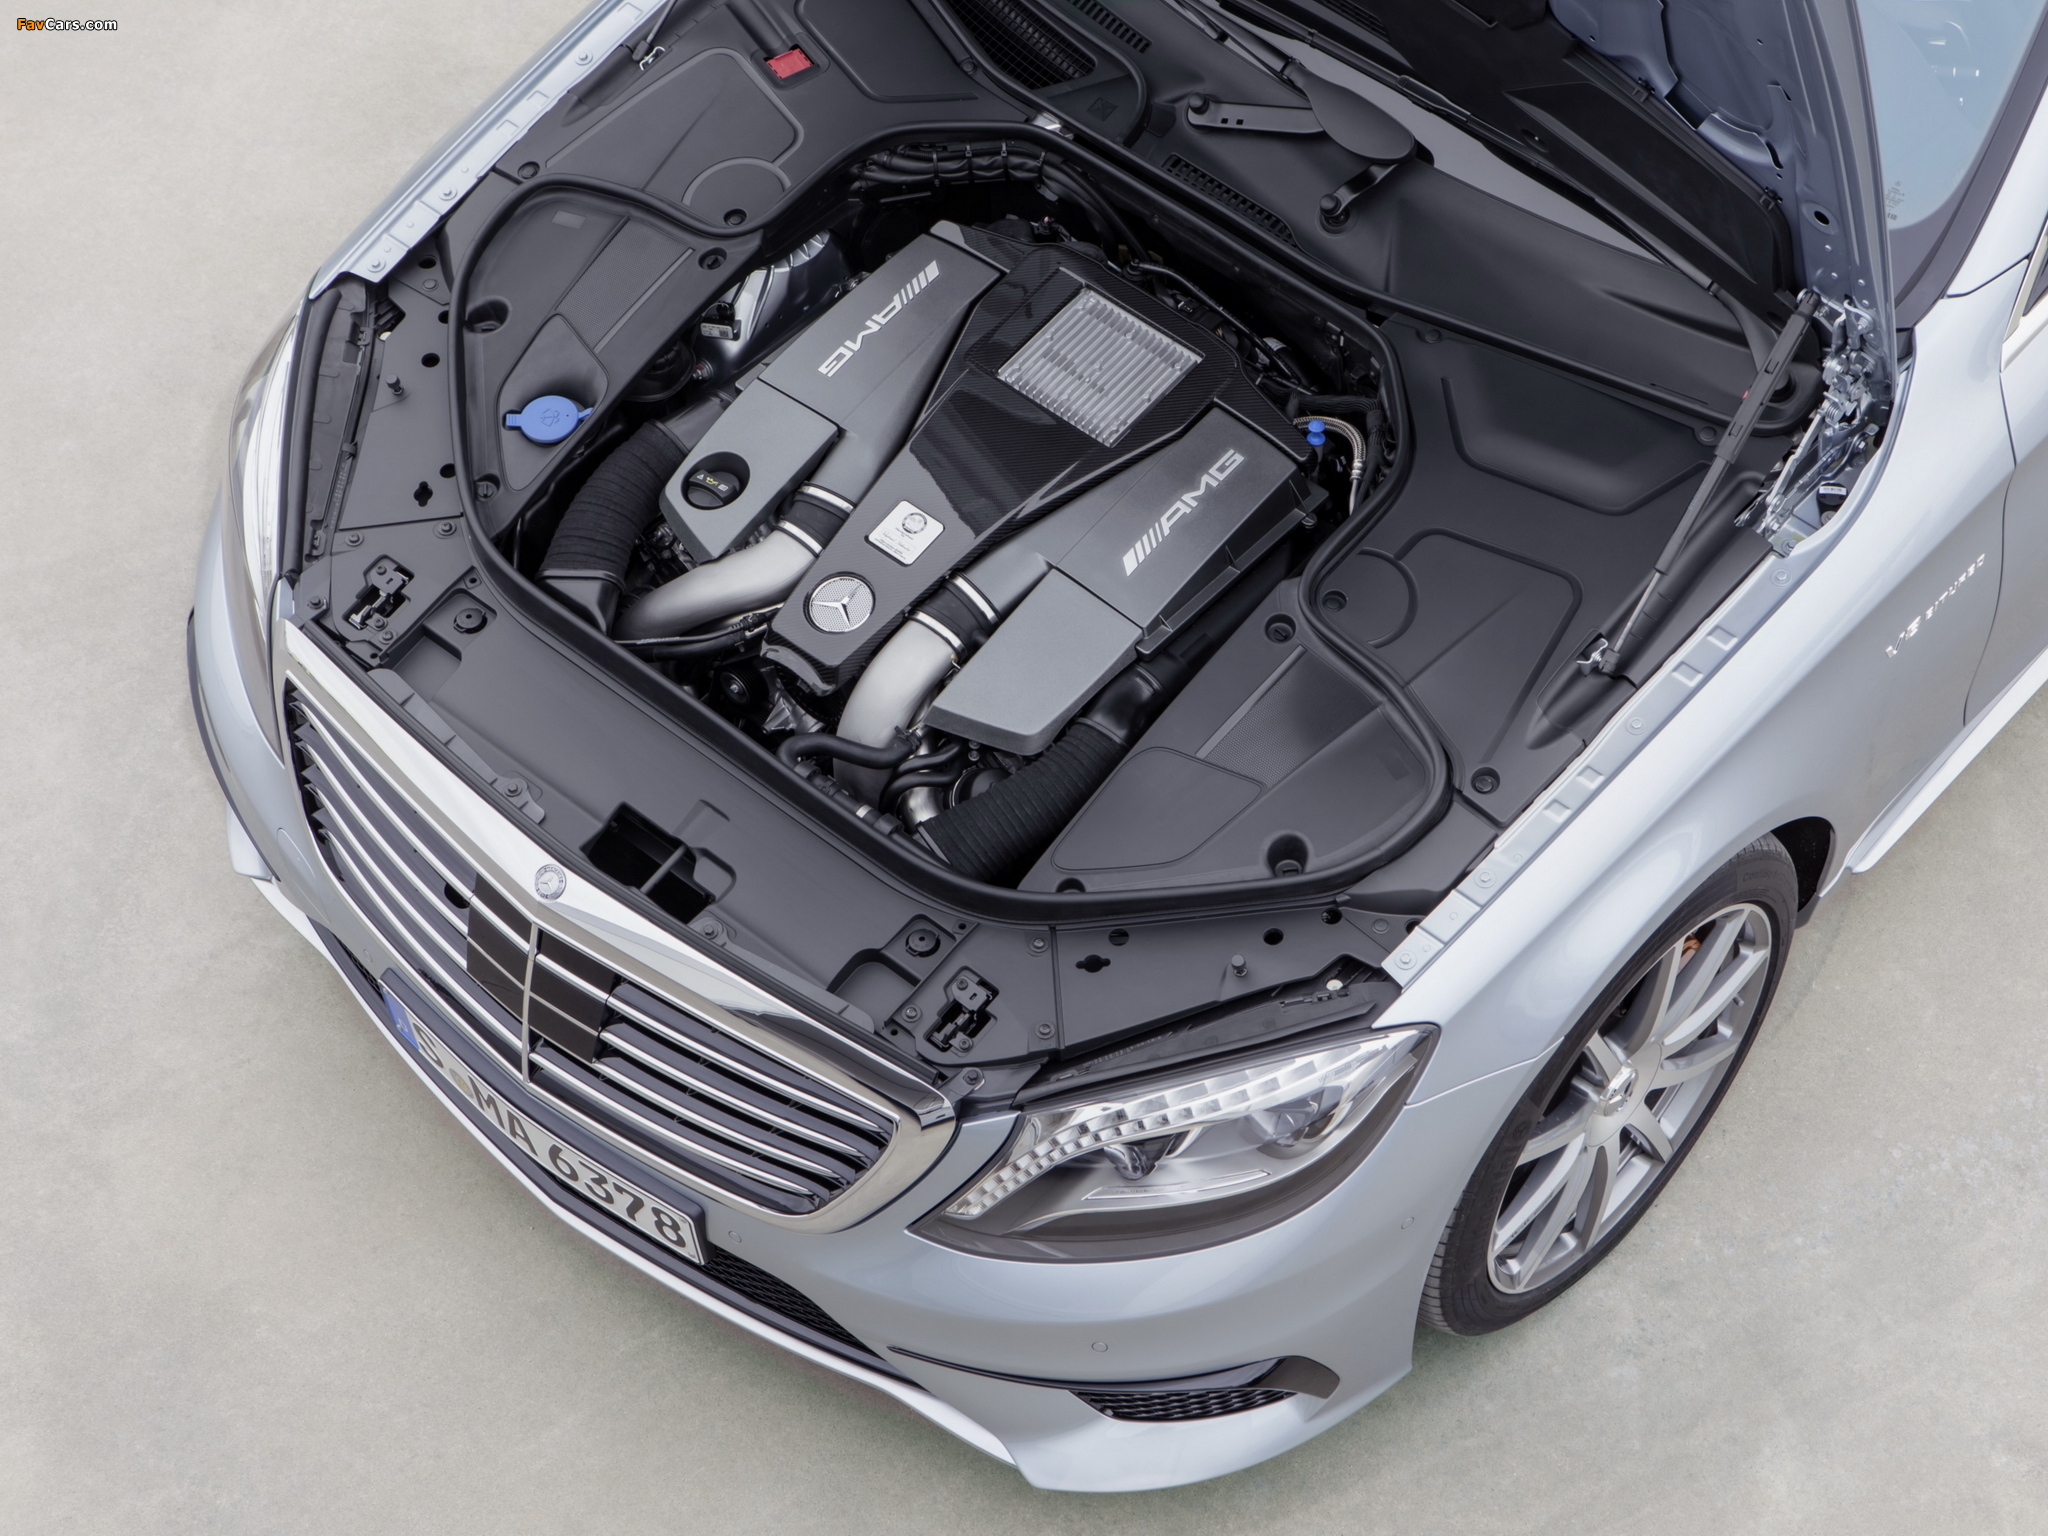 Mercedes-Benz S 63 AMG (W222) 2013 pictures (2048 x 1536)